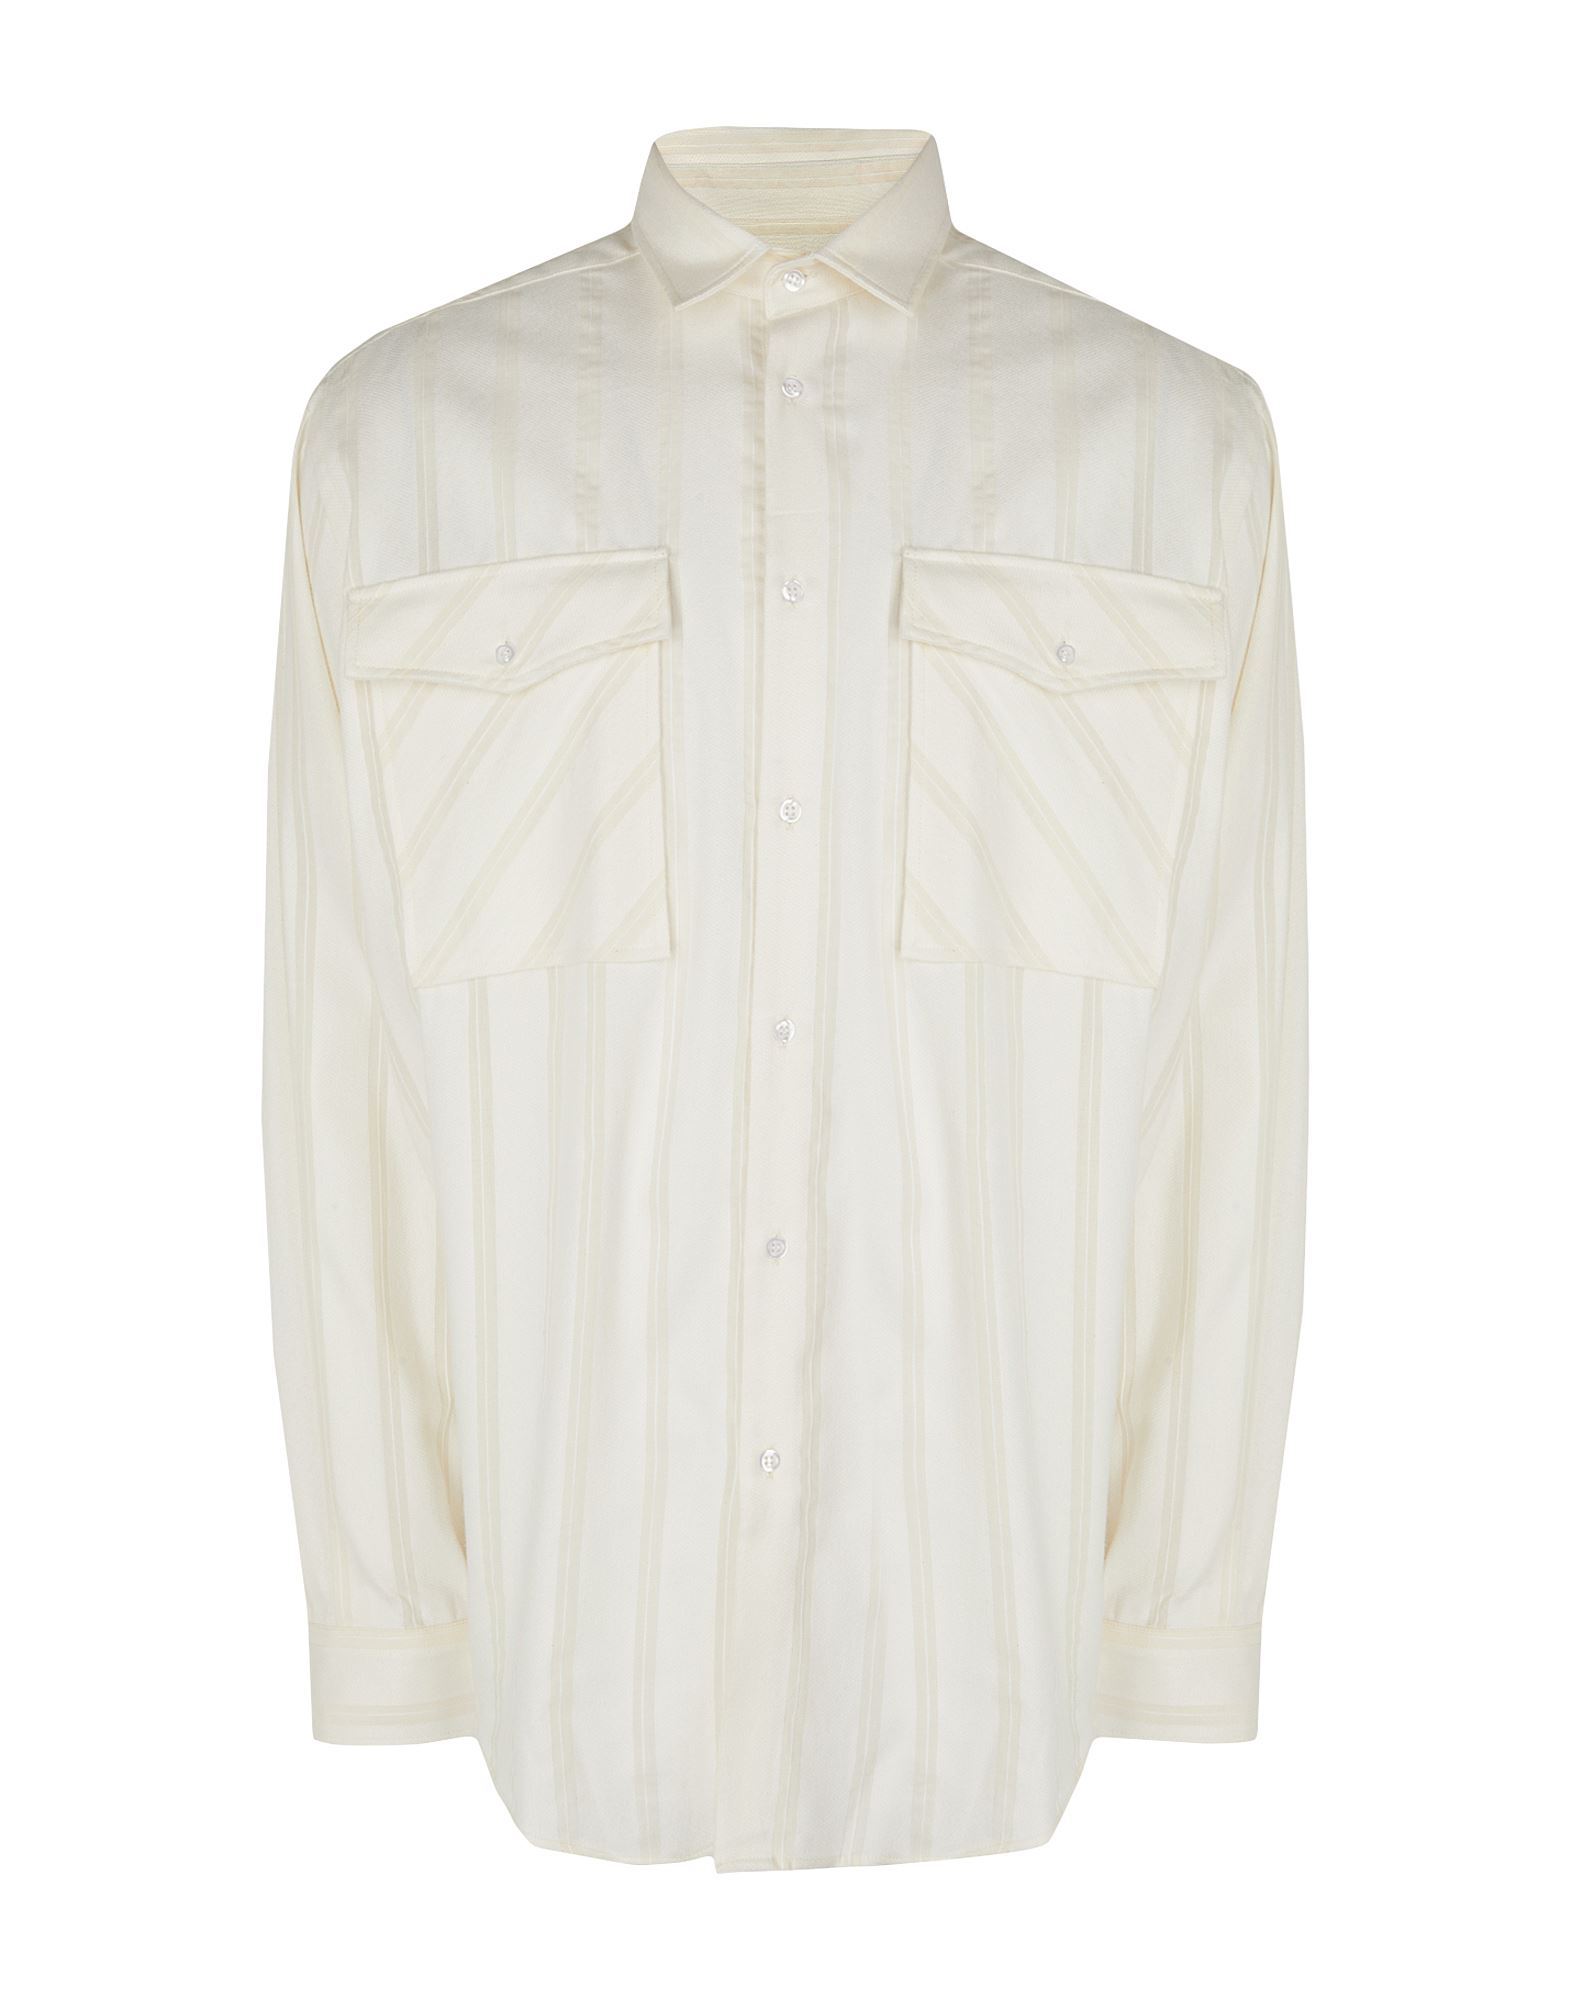 ＜YOOX＞ ★60%OFF！8 by YOOX メンズ シャツ アイボリー S コットン 49% / レーヨン 28% / アクリル 23% COTTON-BLEND PATCH-POCKETS OVER SHIRT